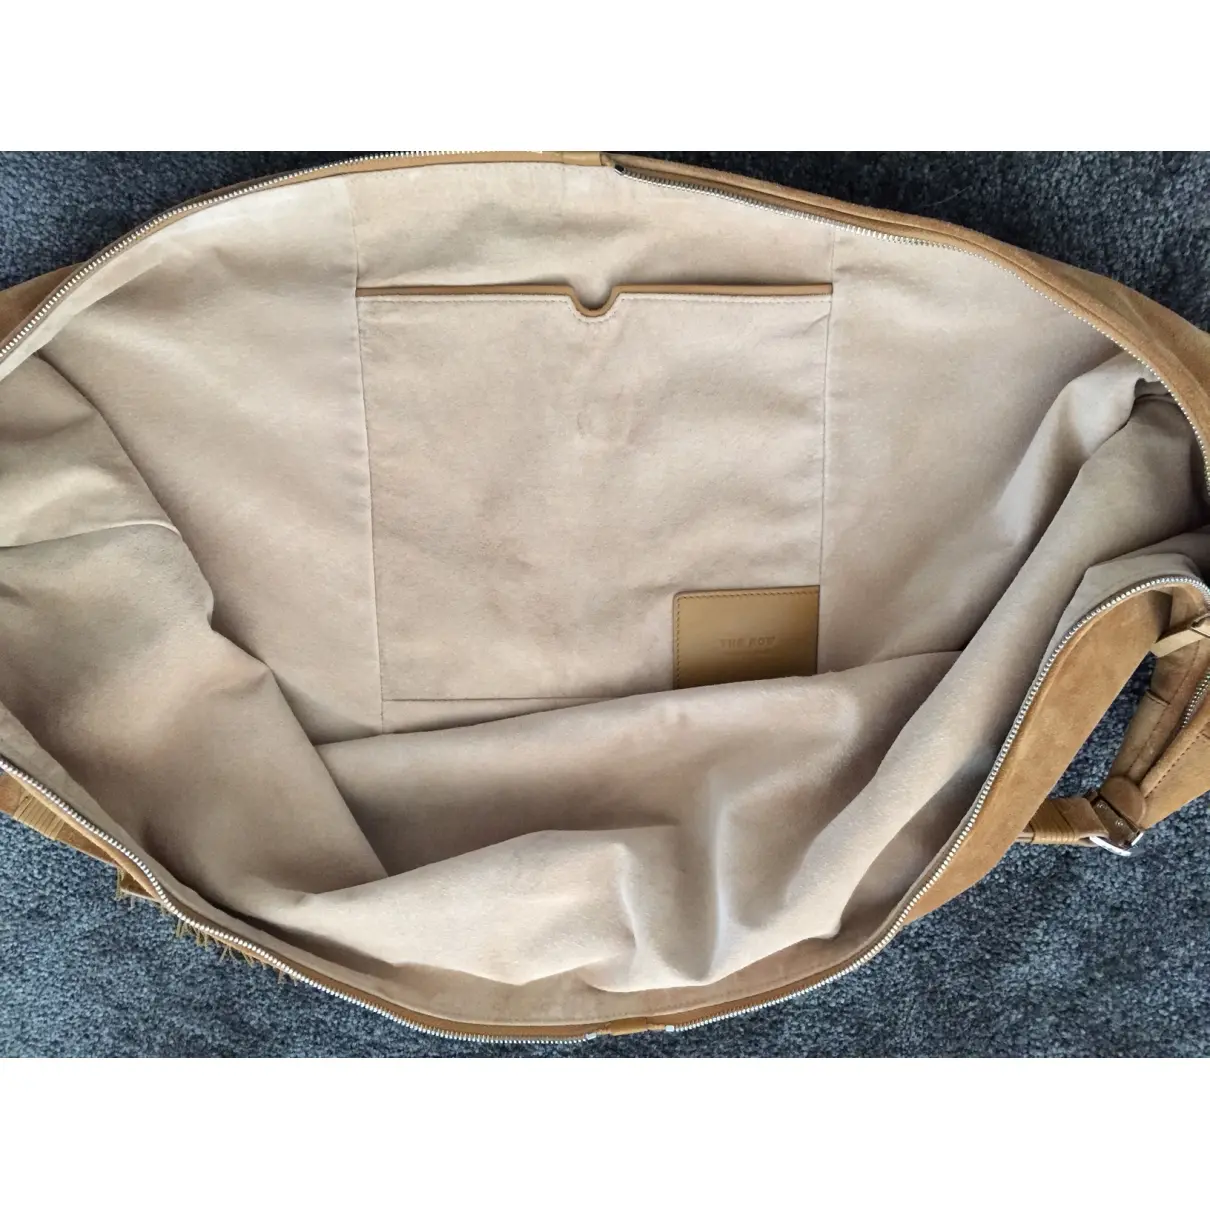 The Row Bag for sale